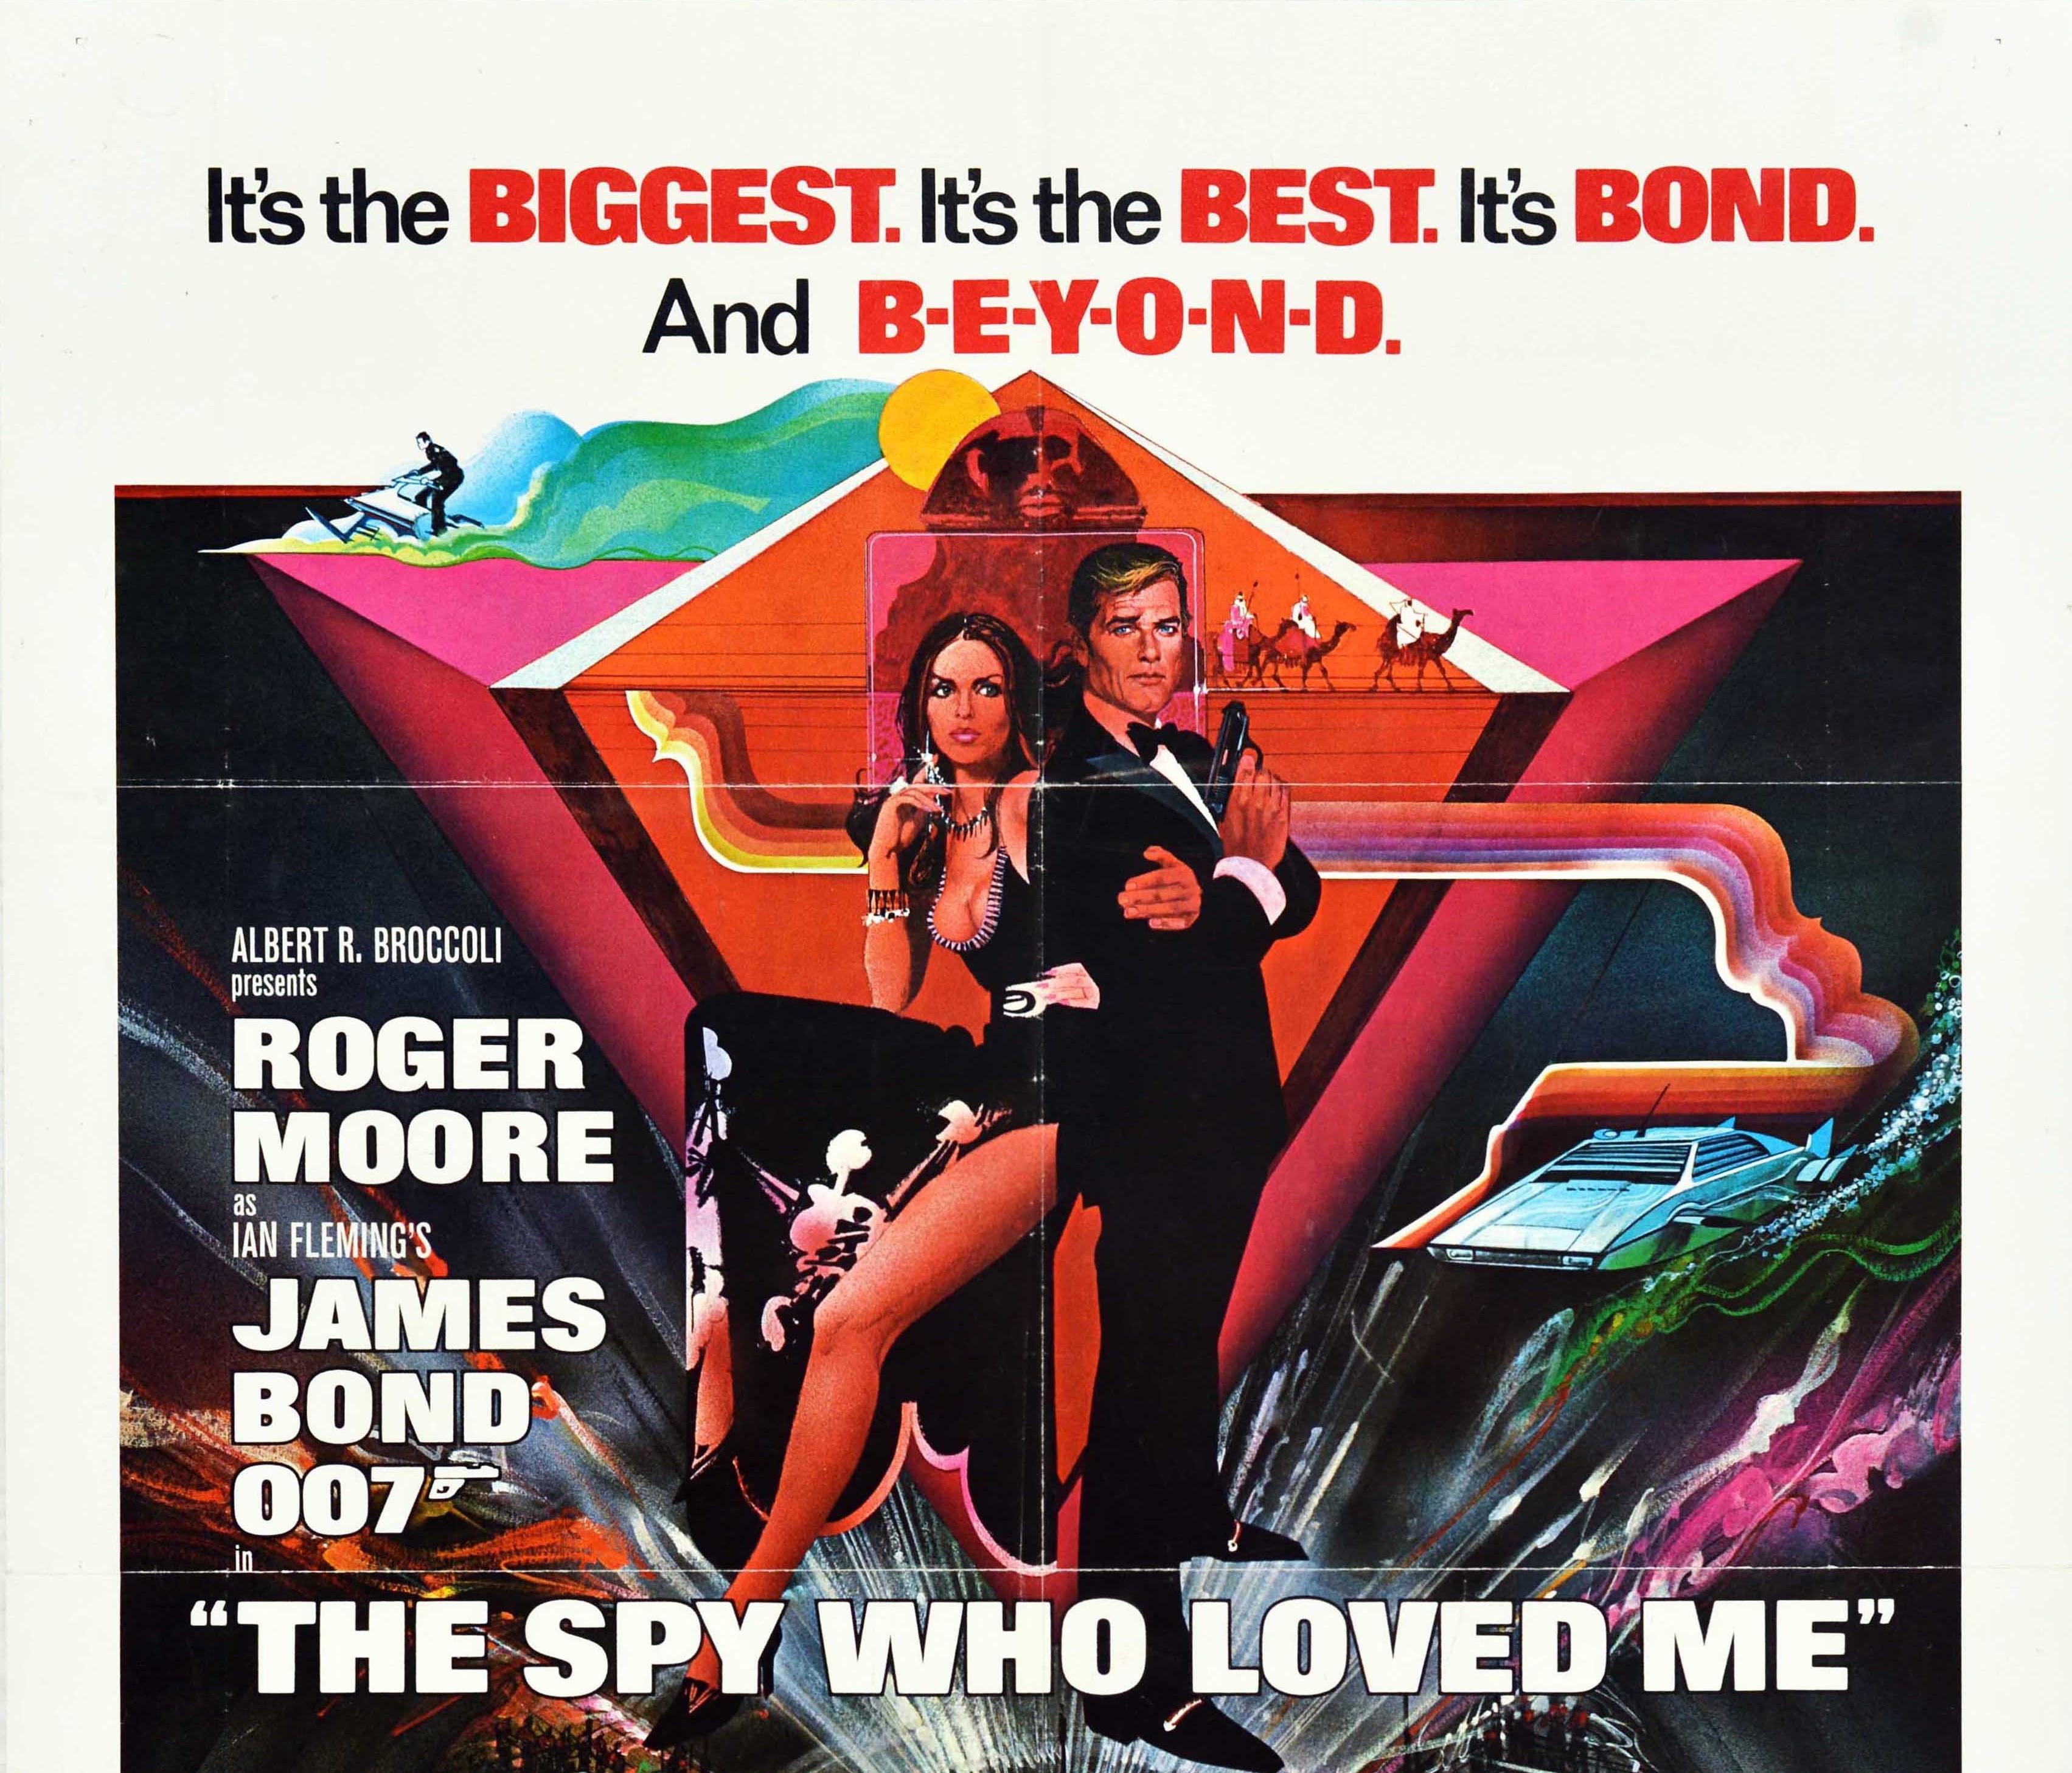 Original vintage movie poster for the classic James Bond film The Spy who Loved Me It's the Biggest It's the Best It's Bond And B-E-Y-O-N-D. Released in 1977, the film was directed by Lewis Gilbert and starred Roger Moore as 007, Barbara Bach and